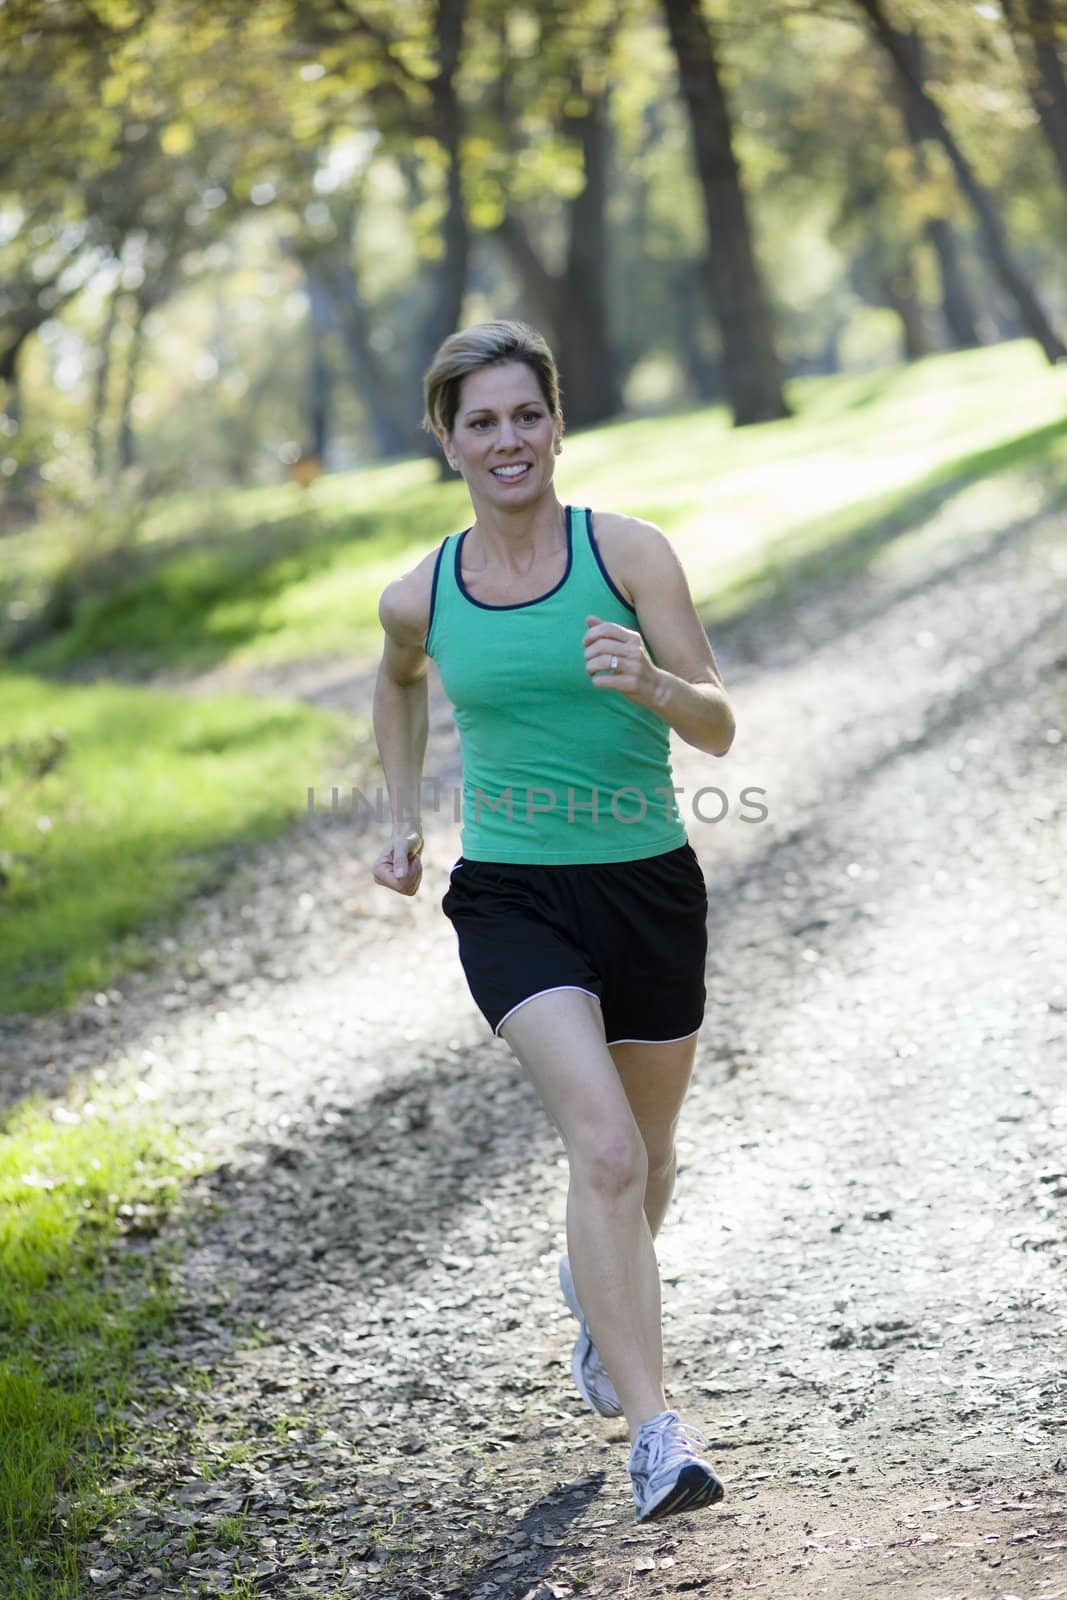 Pretty Athletic Woman Running in a Park